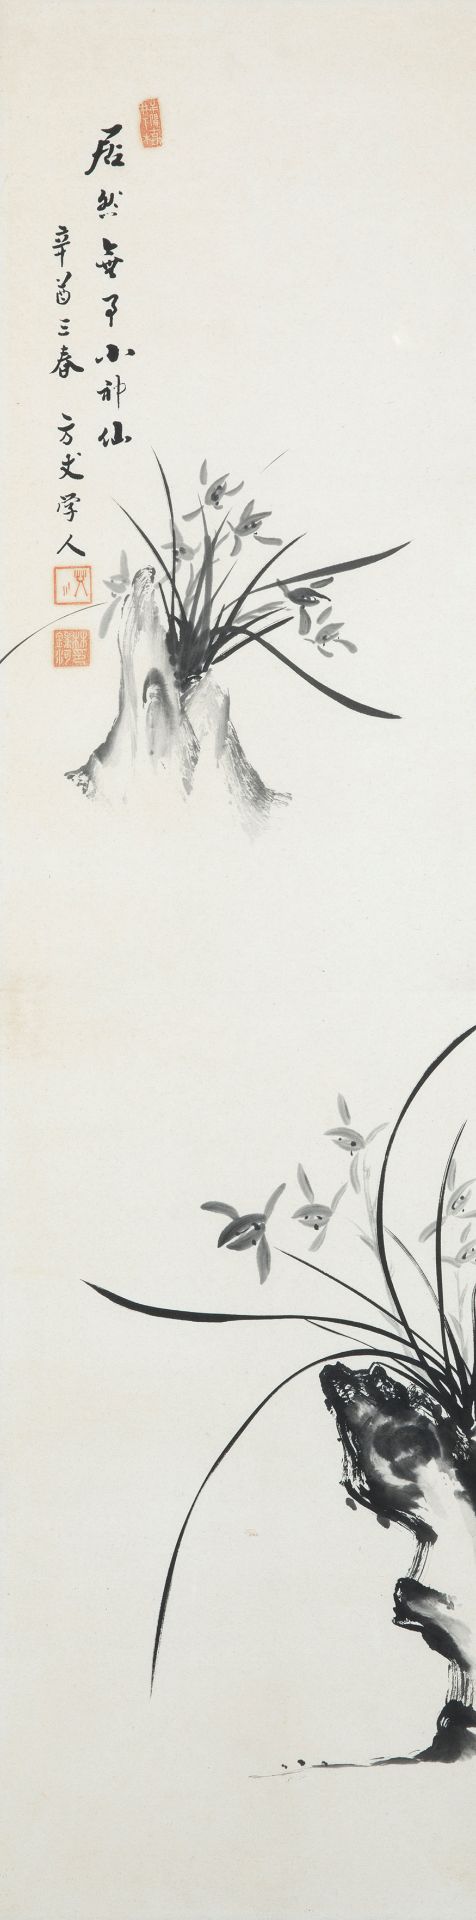 PAINTING ON PAPER, CHINA, 19TH-20TH CENTURY